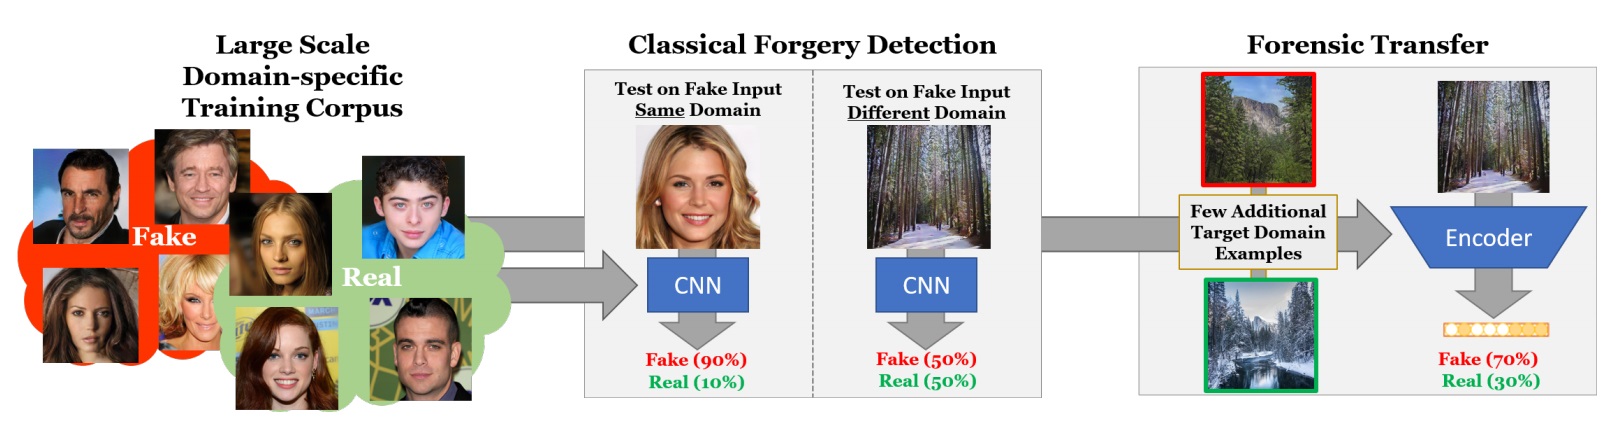 ForensicTransfer: Weakly-supervised Domain Adaptation for Forgery Detection